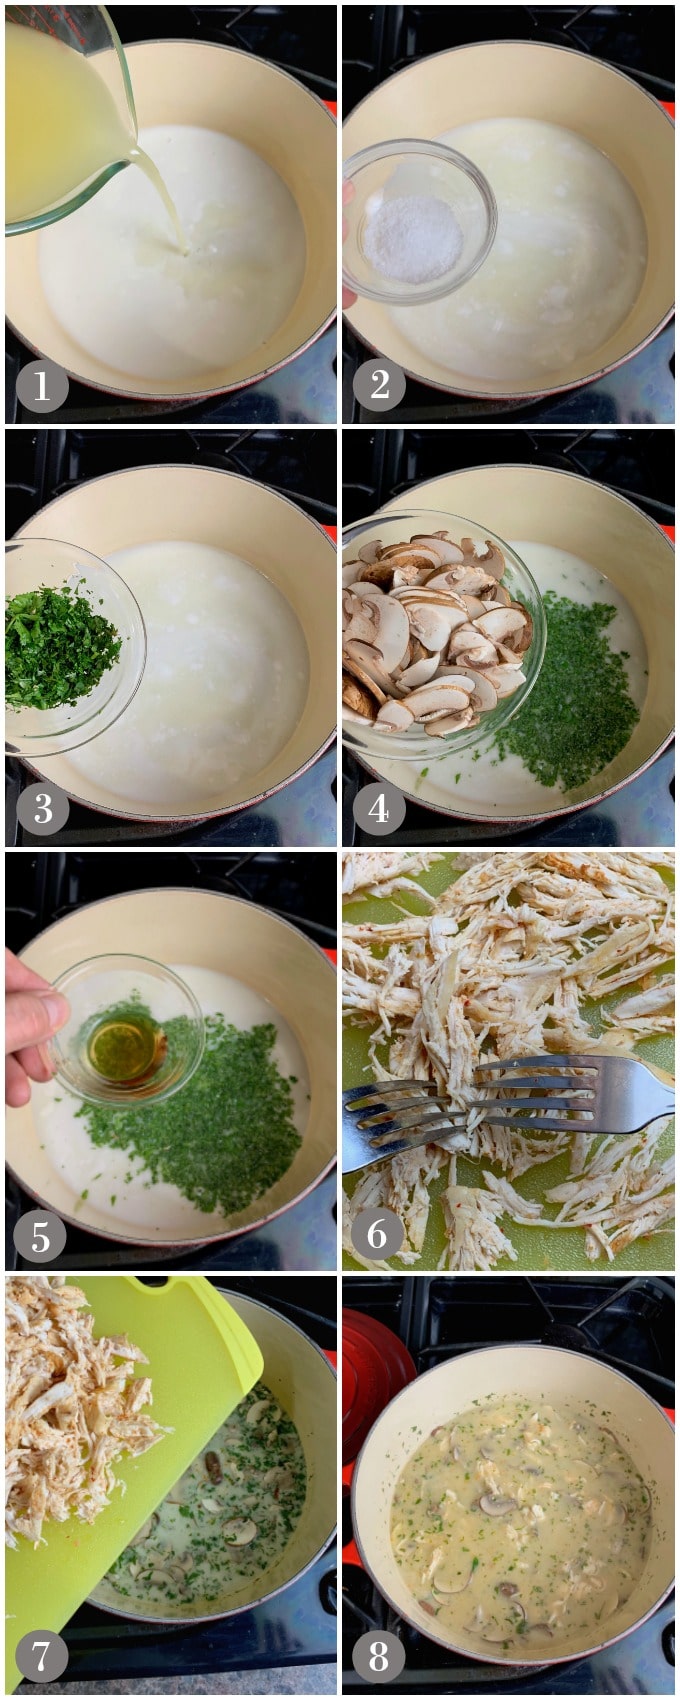 A collage of photos showing chicken broth and coconut milk to make Thai coconut soup.